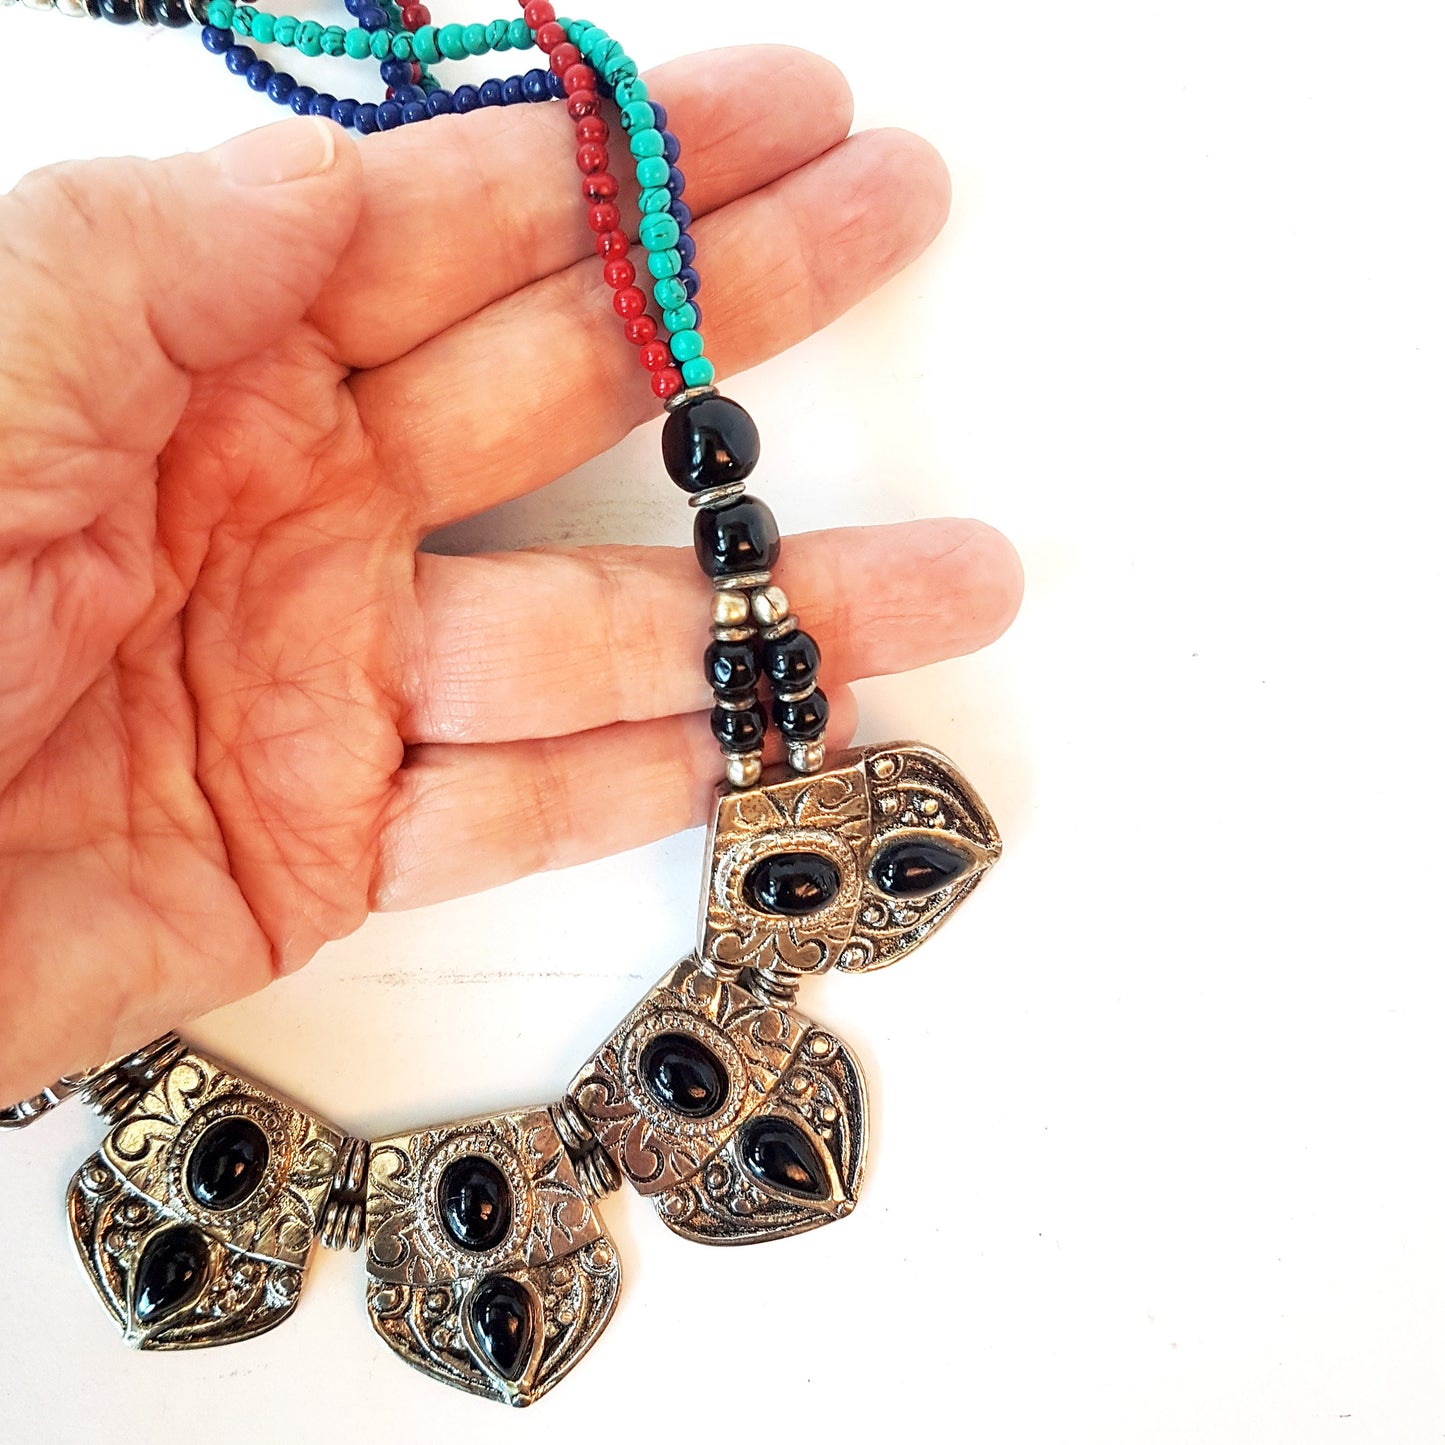 Dramatic Indo Tibetan necklace with black onyx stones inlaid on embossed silver metal. Multicolor beaded rope finish. - Vintage India Ca